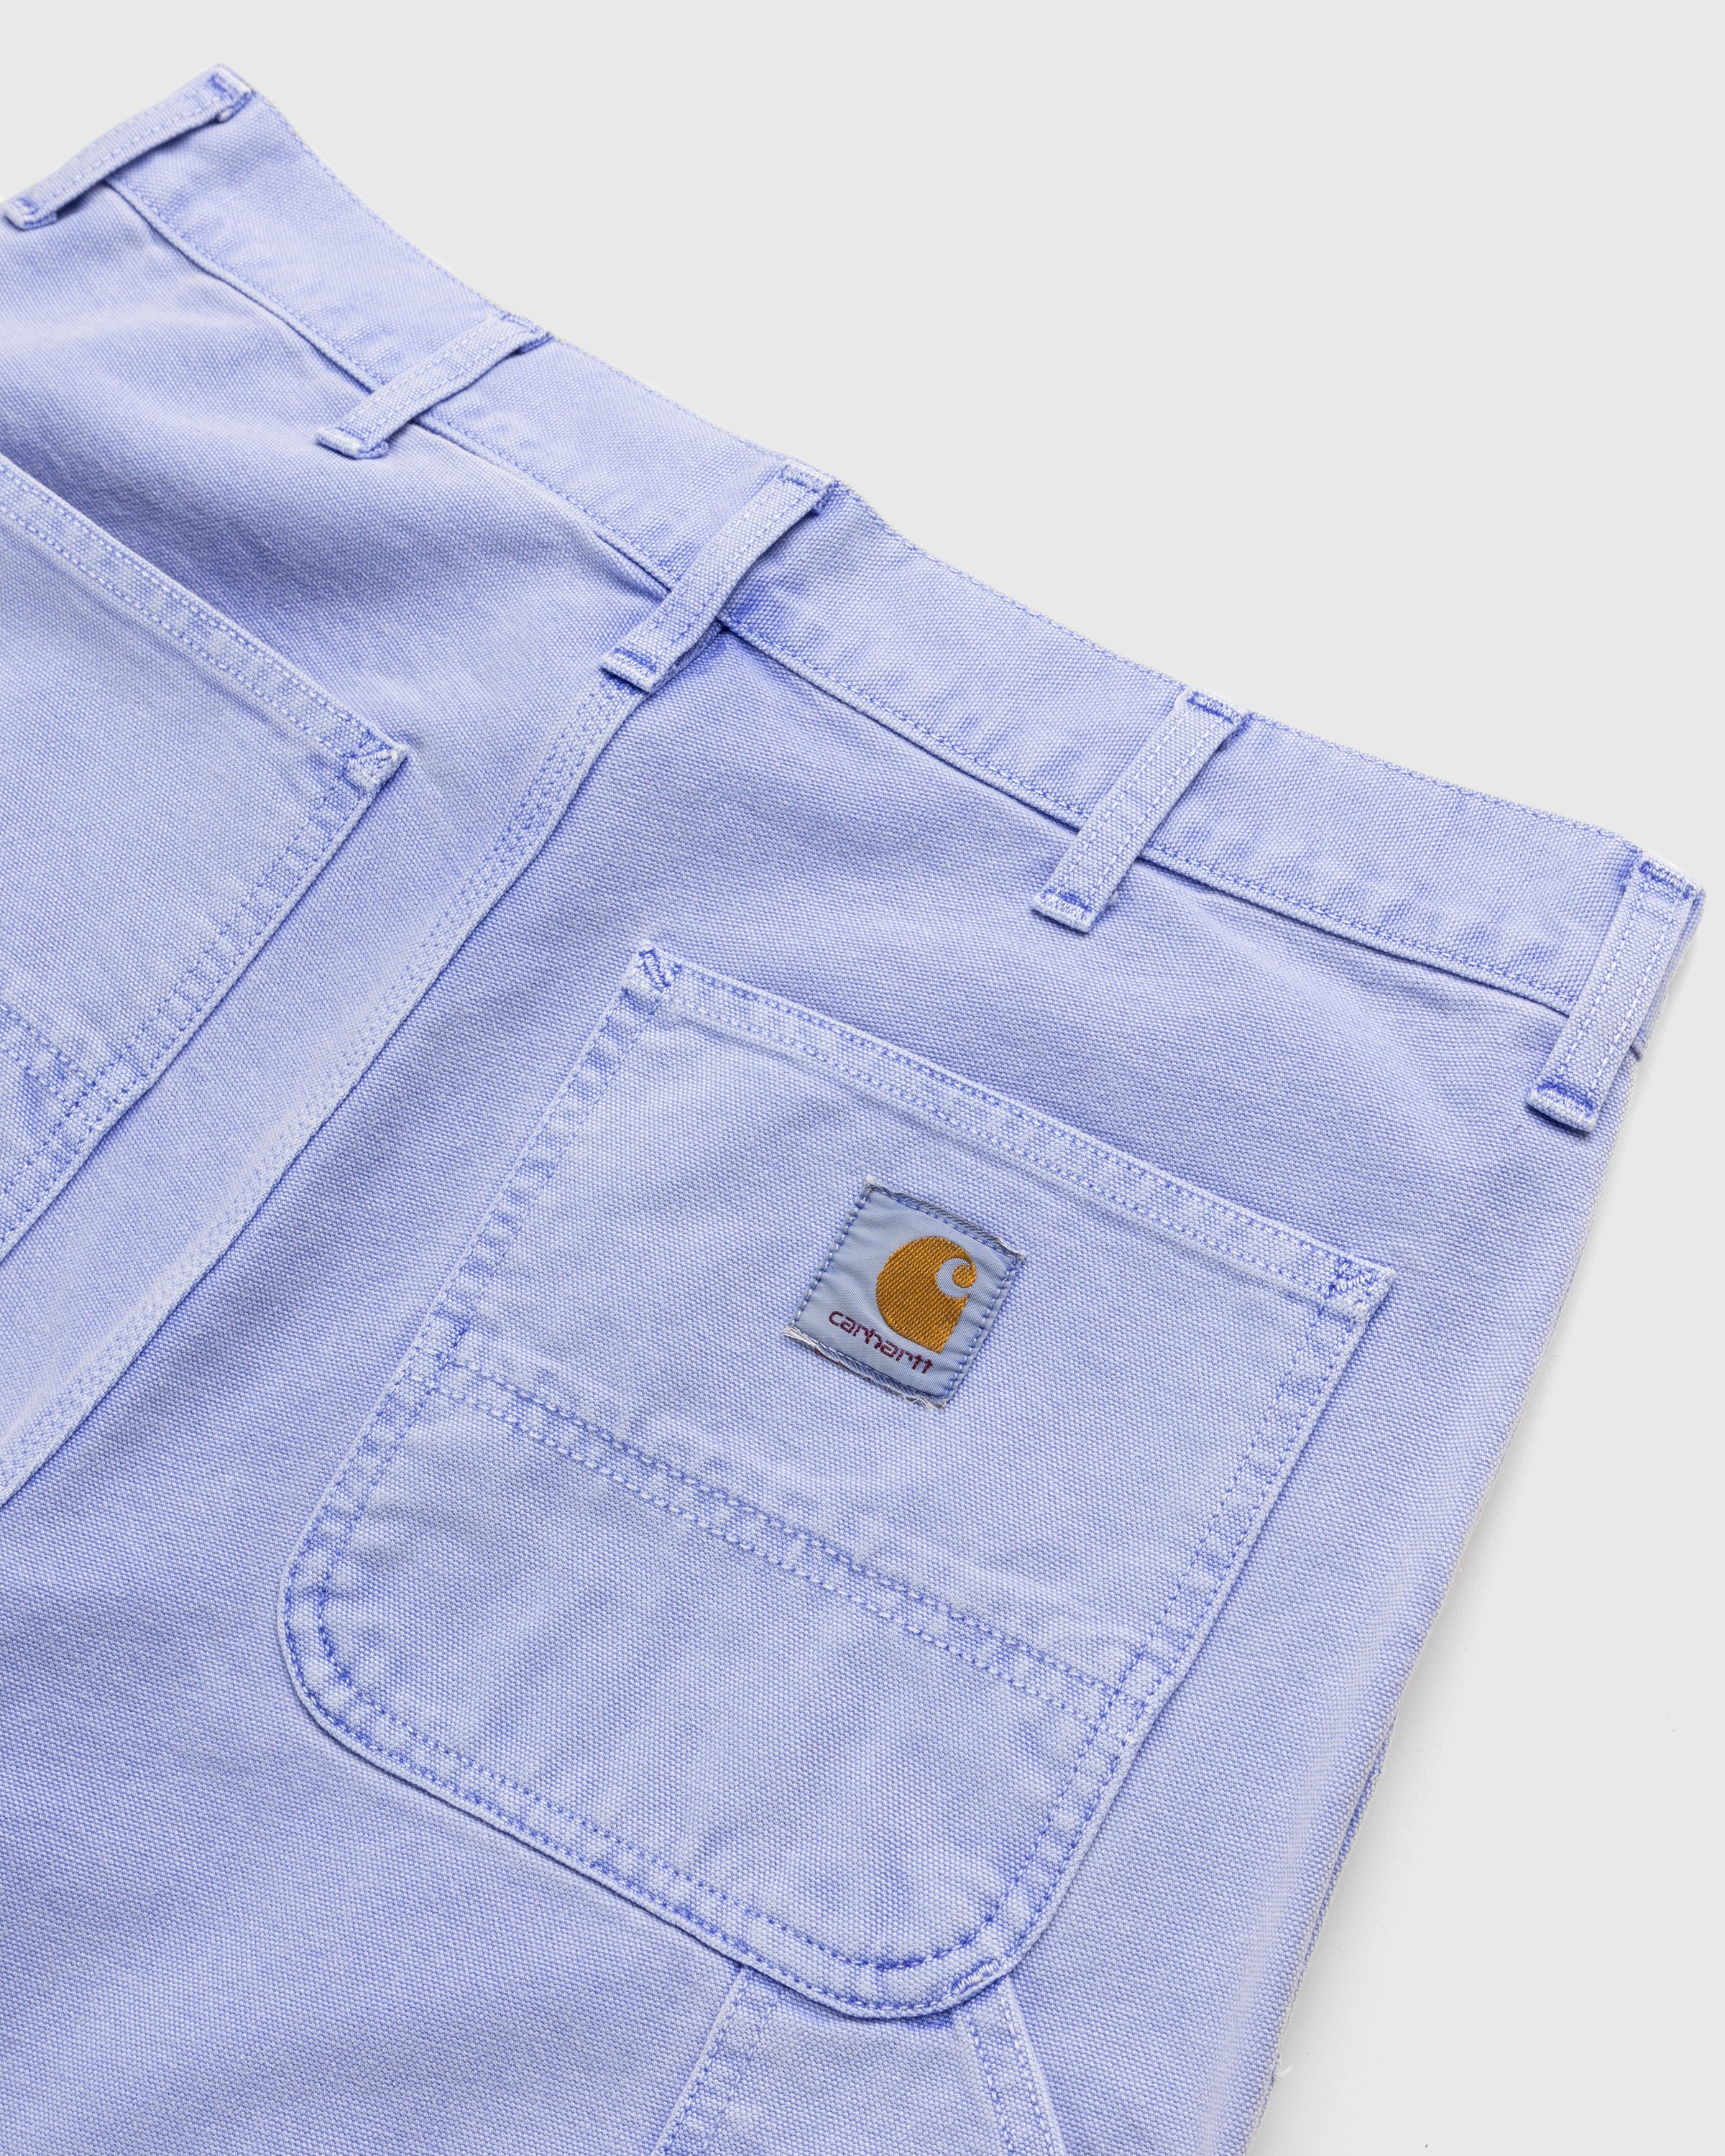 Carhartt WIP - Double Knee Pant Icy Water Faded - Clothing - Blue - Image 3